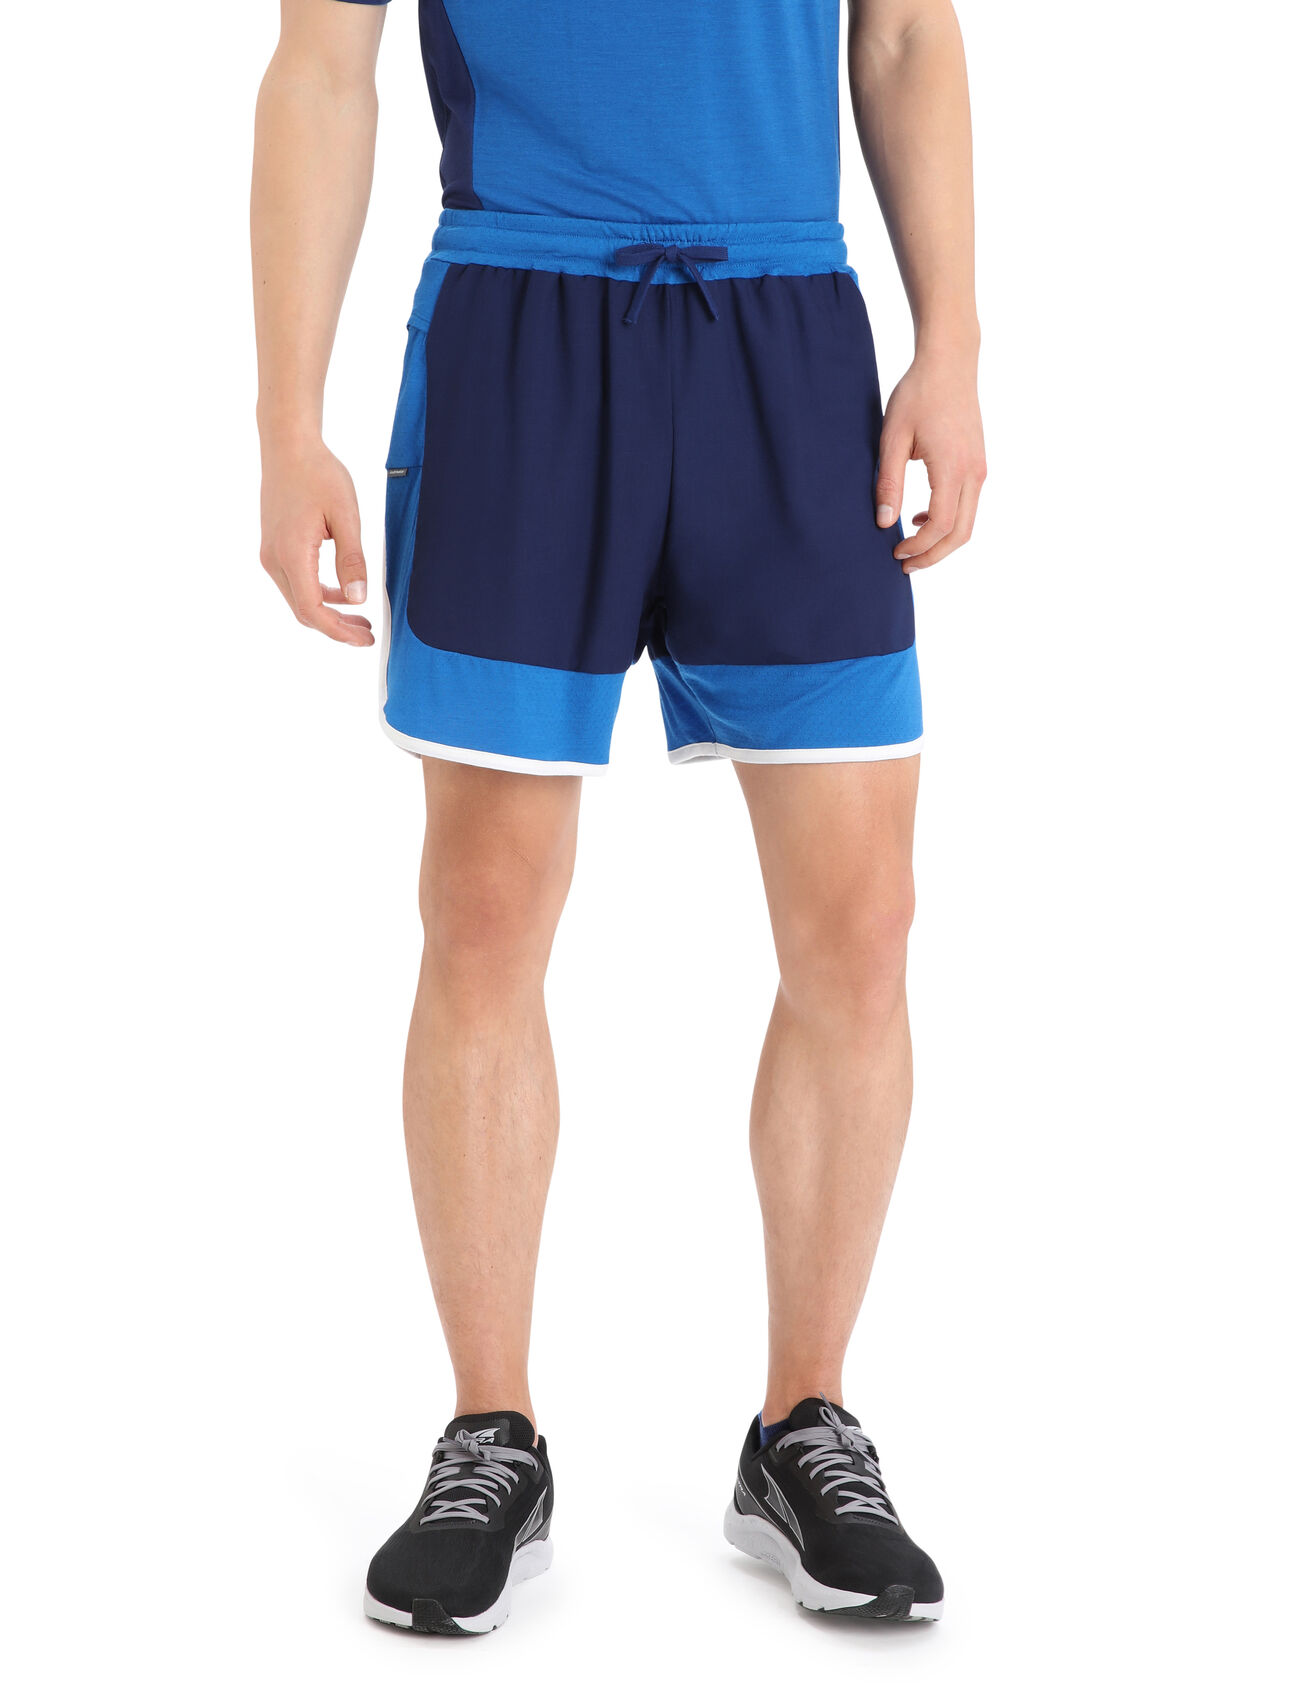 Mens ZoneKnit™ Merino Shorts Lightweight, highly breathable shorts designed for running, the ZoneKnit™ Shorts combine our Cool-Lite™ jersey fabric with body-mapped panels of Cool-Lite eyelet mesh for enhanced temperature regulation.